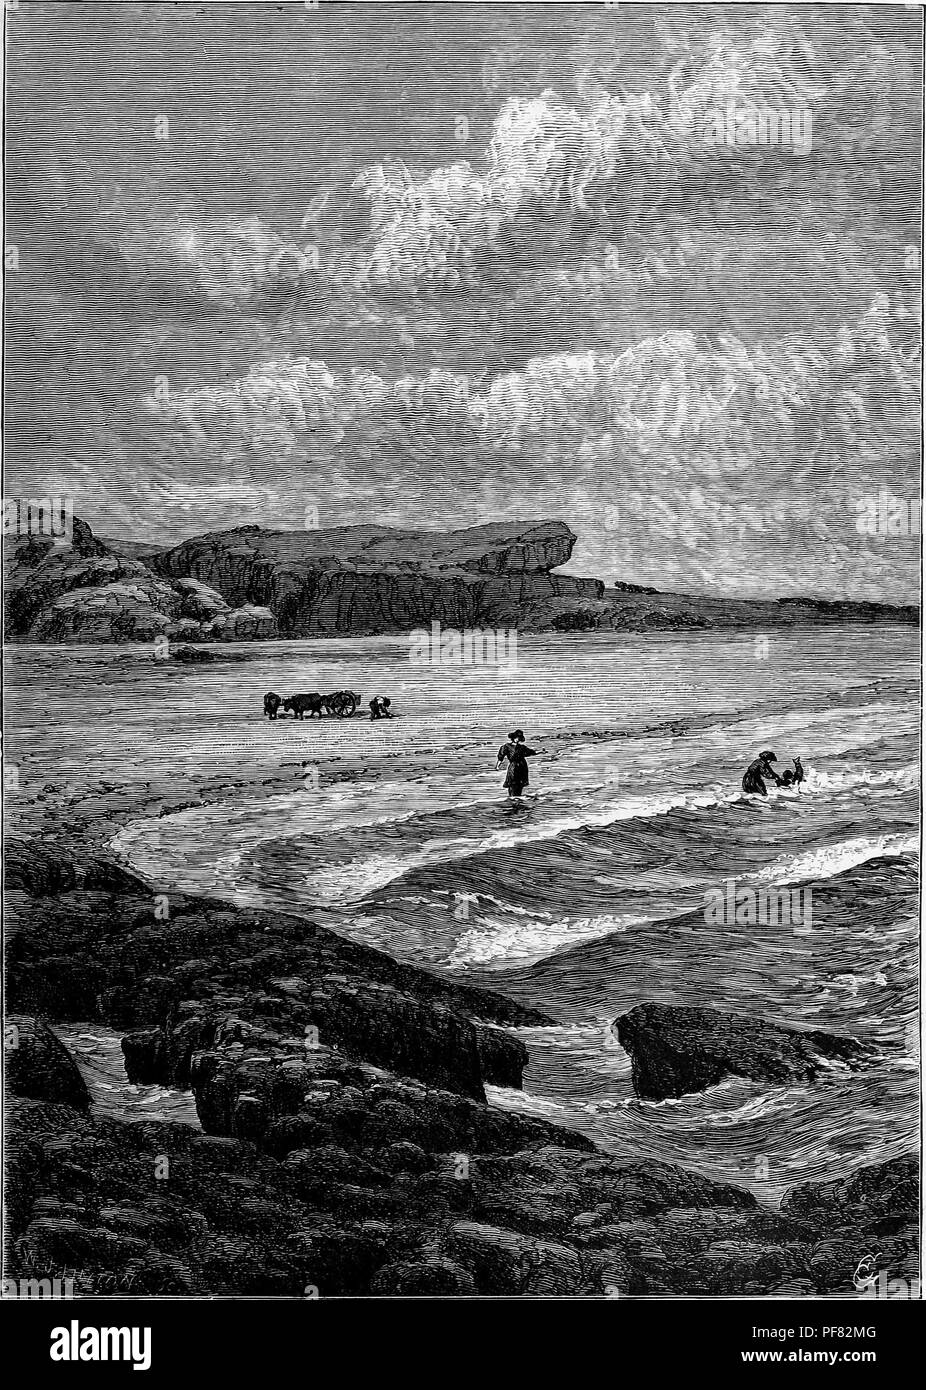 Black and white vintage print depicting several people playing in the waves, with oxen hitched to a small cart on the beach behind them and rocky cliffs in the background, in an area alternatively called Berkeley's Seat, Paradise Rocks, or Hanging Rocks, located near 'Whitehall, ' the former residence of Dean Berkeley, just northeast of Purgatory in Rhode Island, USA, published in William Cullen Bryant's edited volume 'Picturesque America; or, The Land We Live In', 1872. Courtesy Internet Archive. () Stock Photo